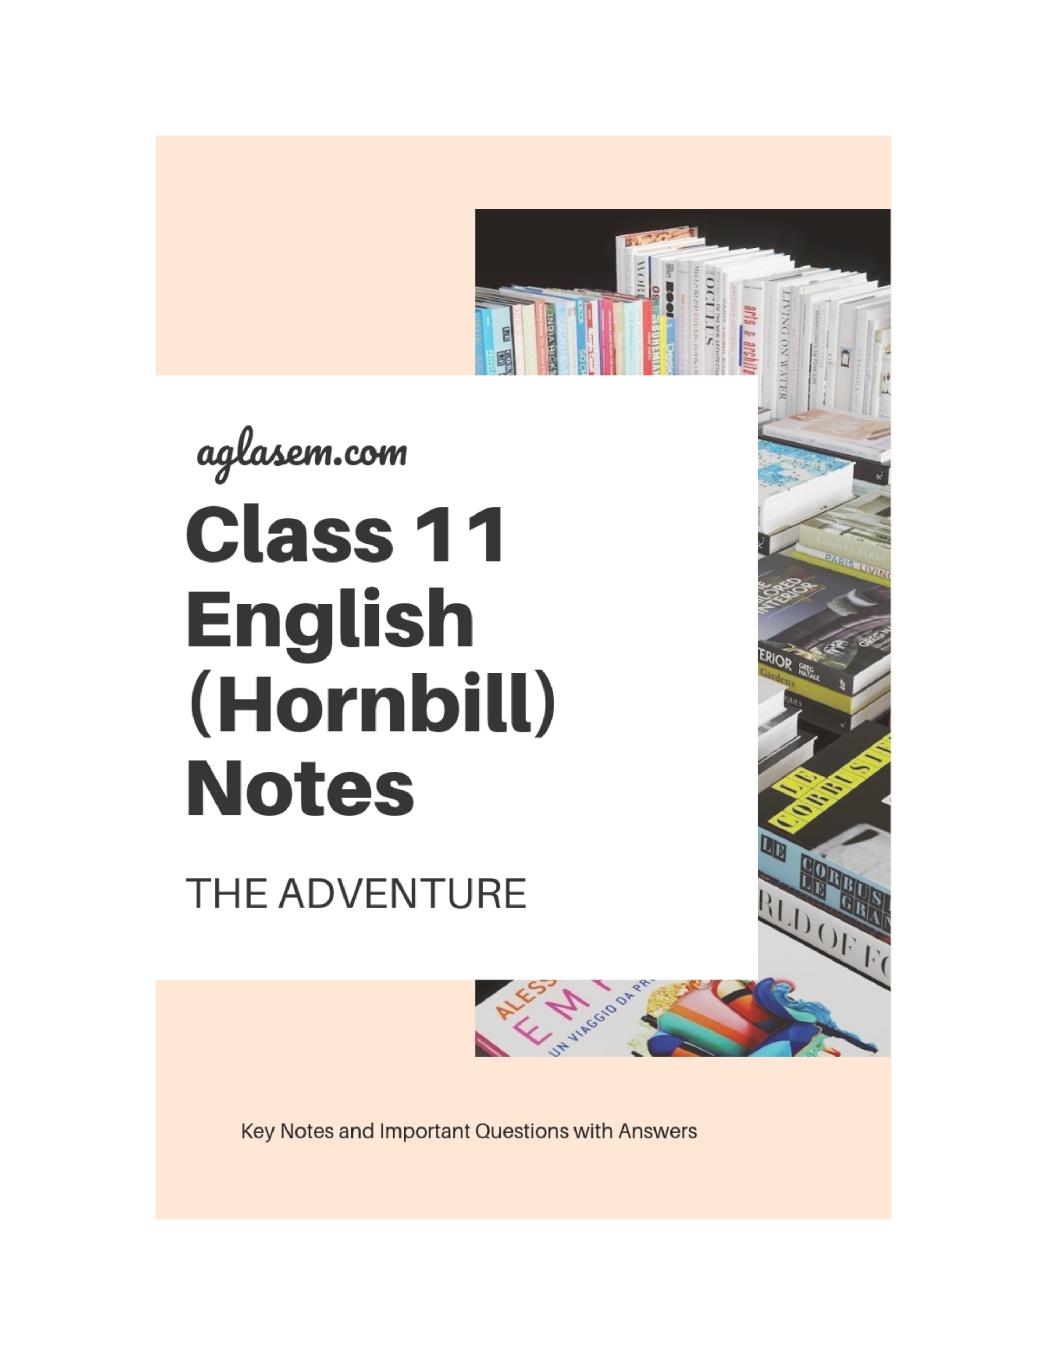 Class 11 English Hornbill Notes For The Adventure - Page 1